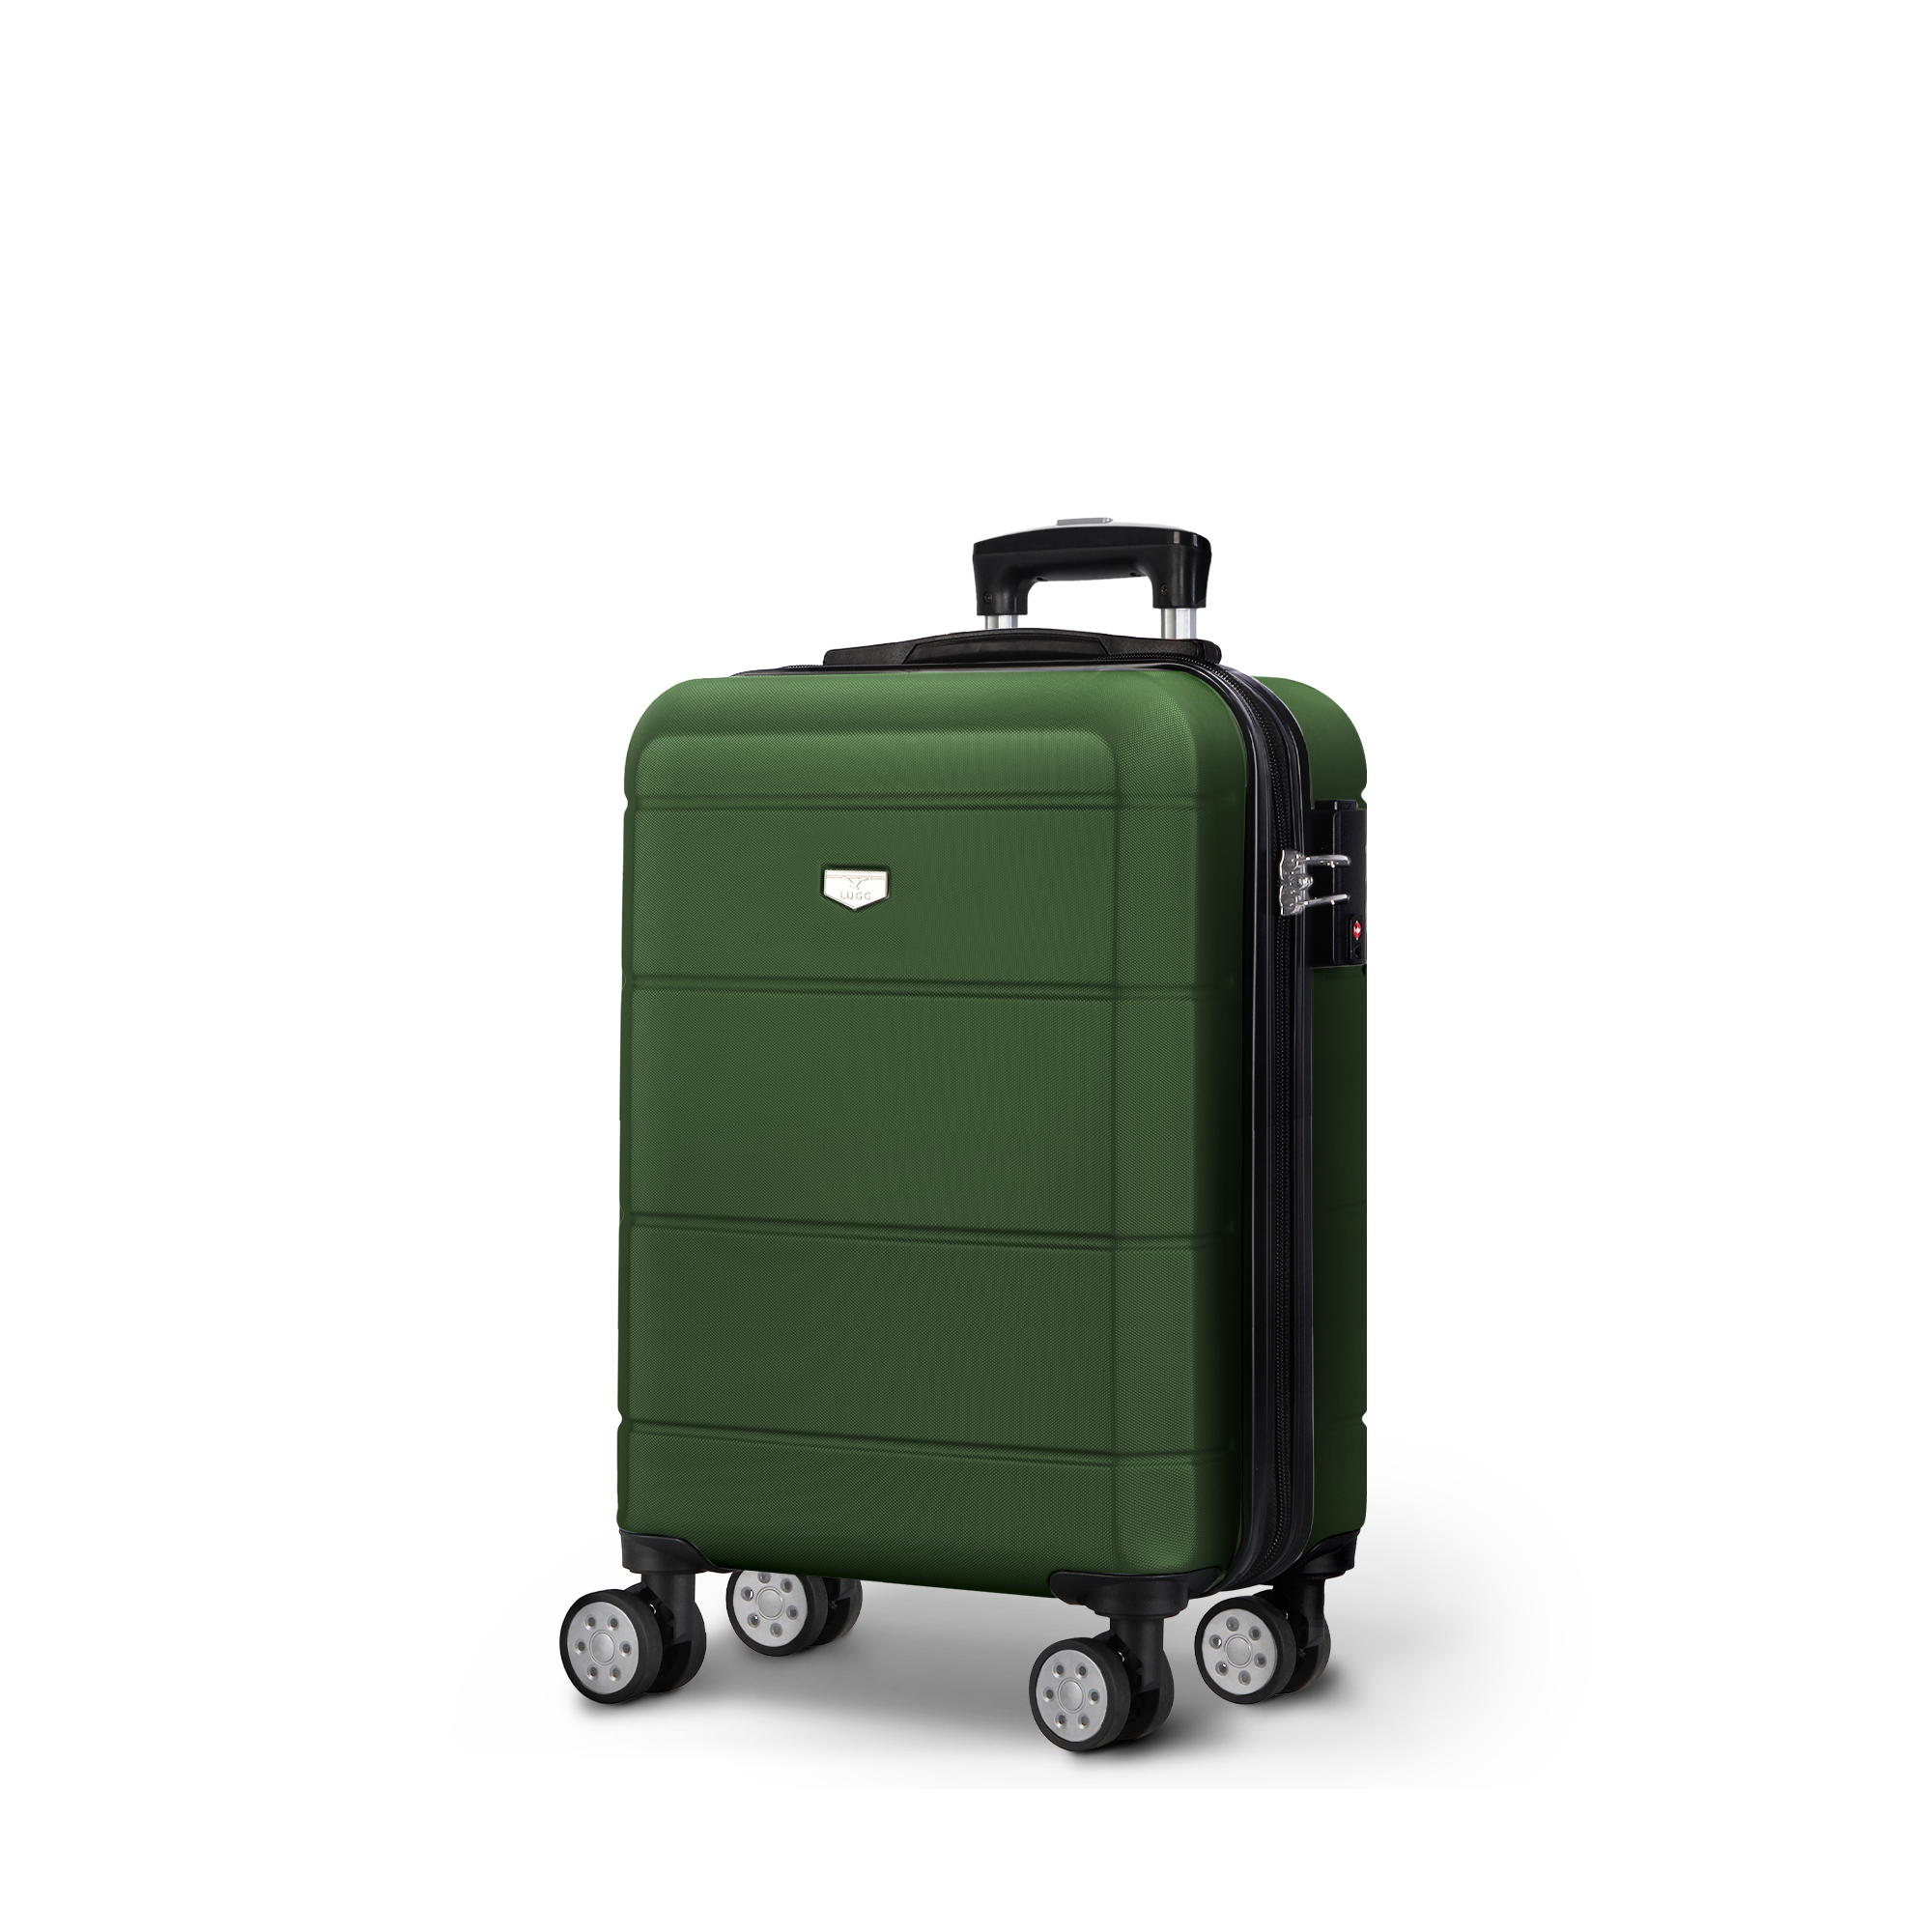 Jetset 20-inch Suitcase in Army Green